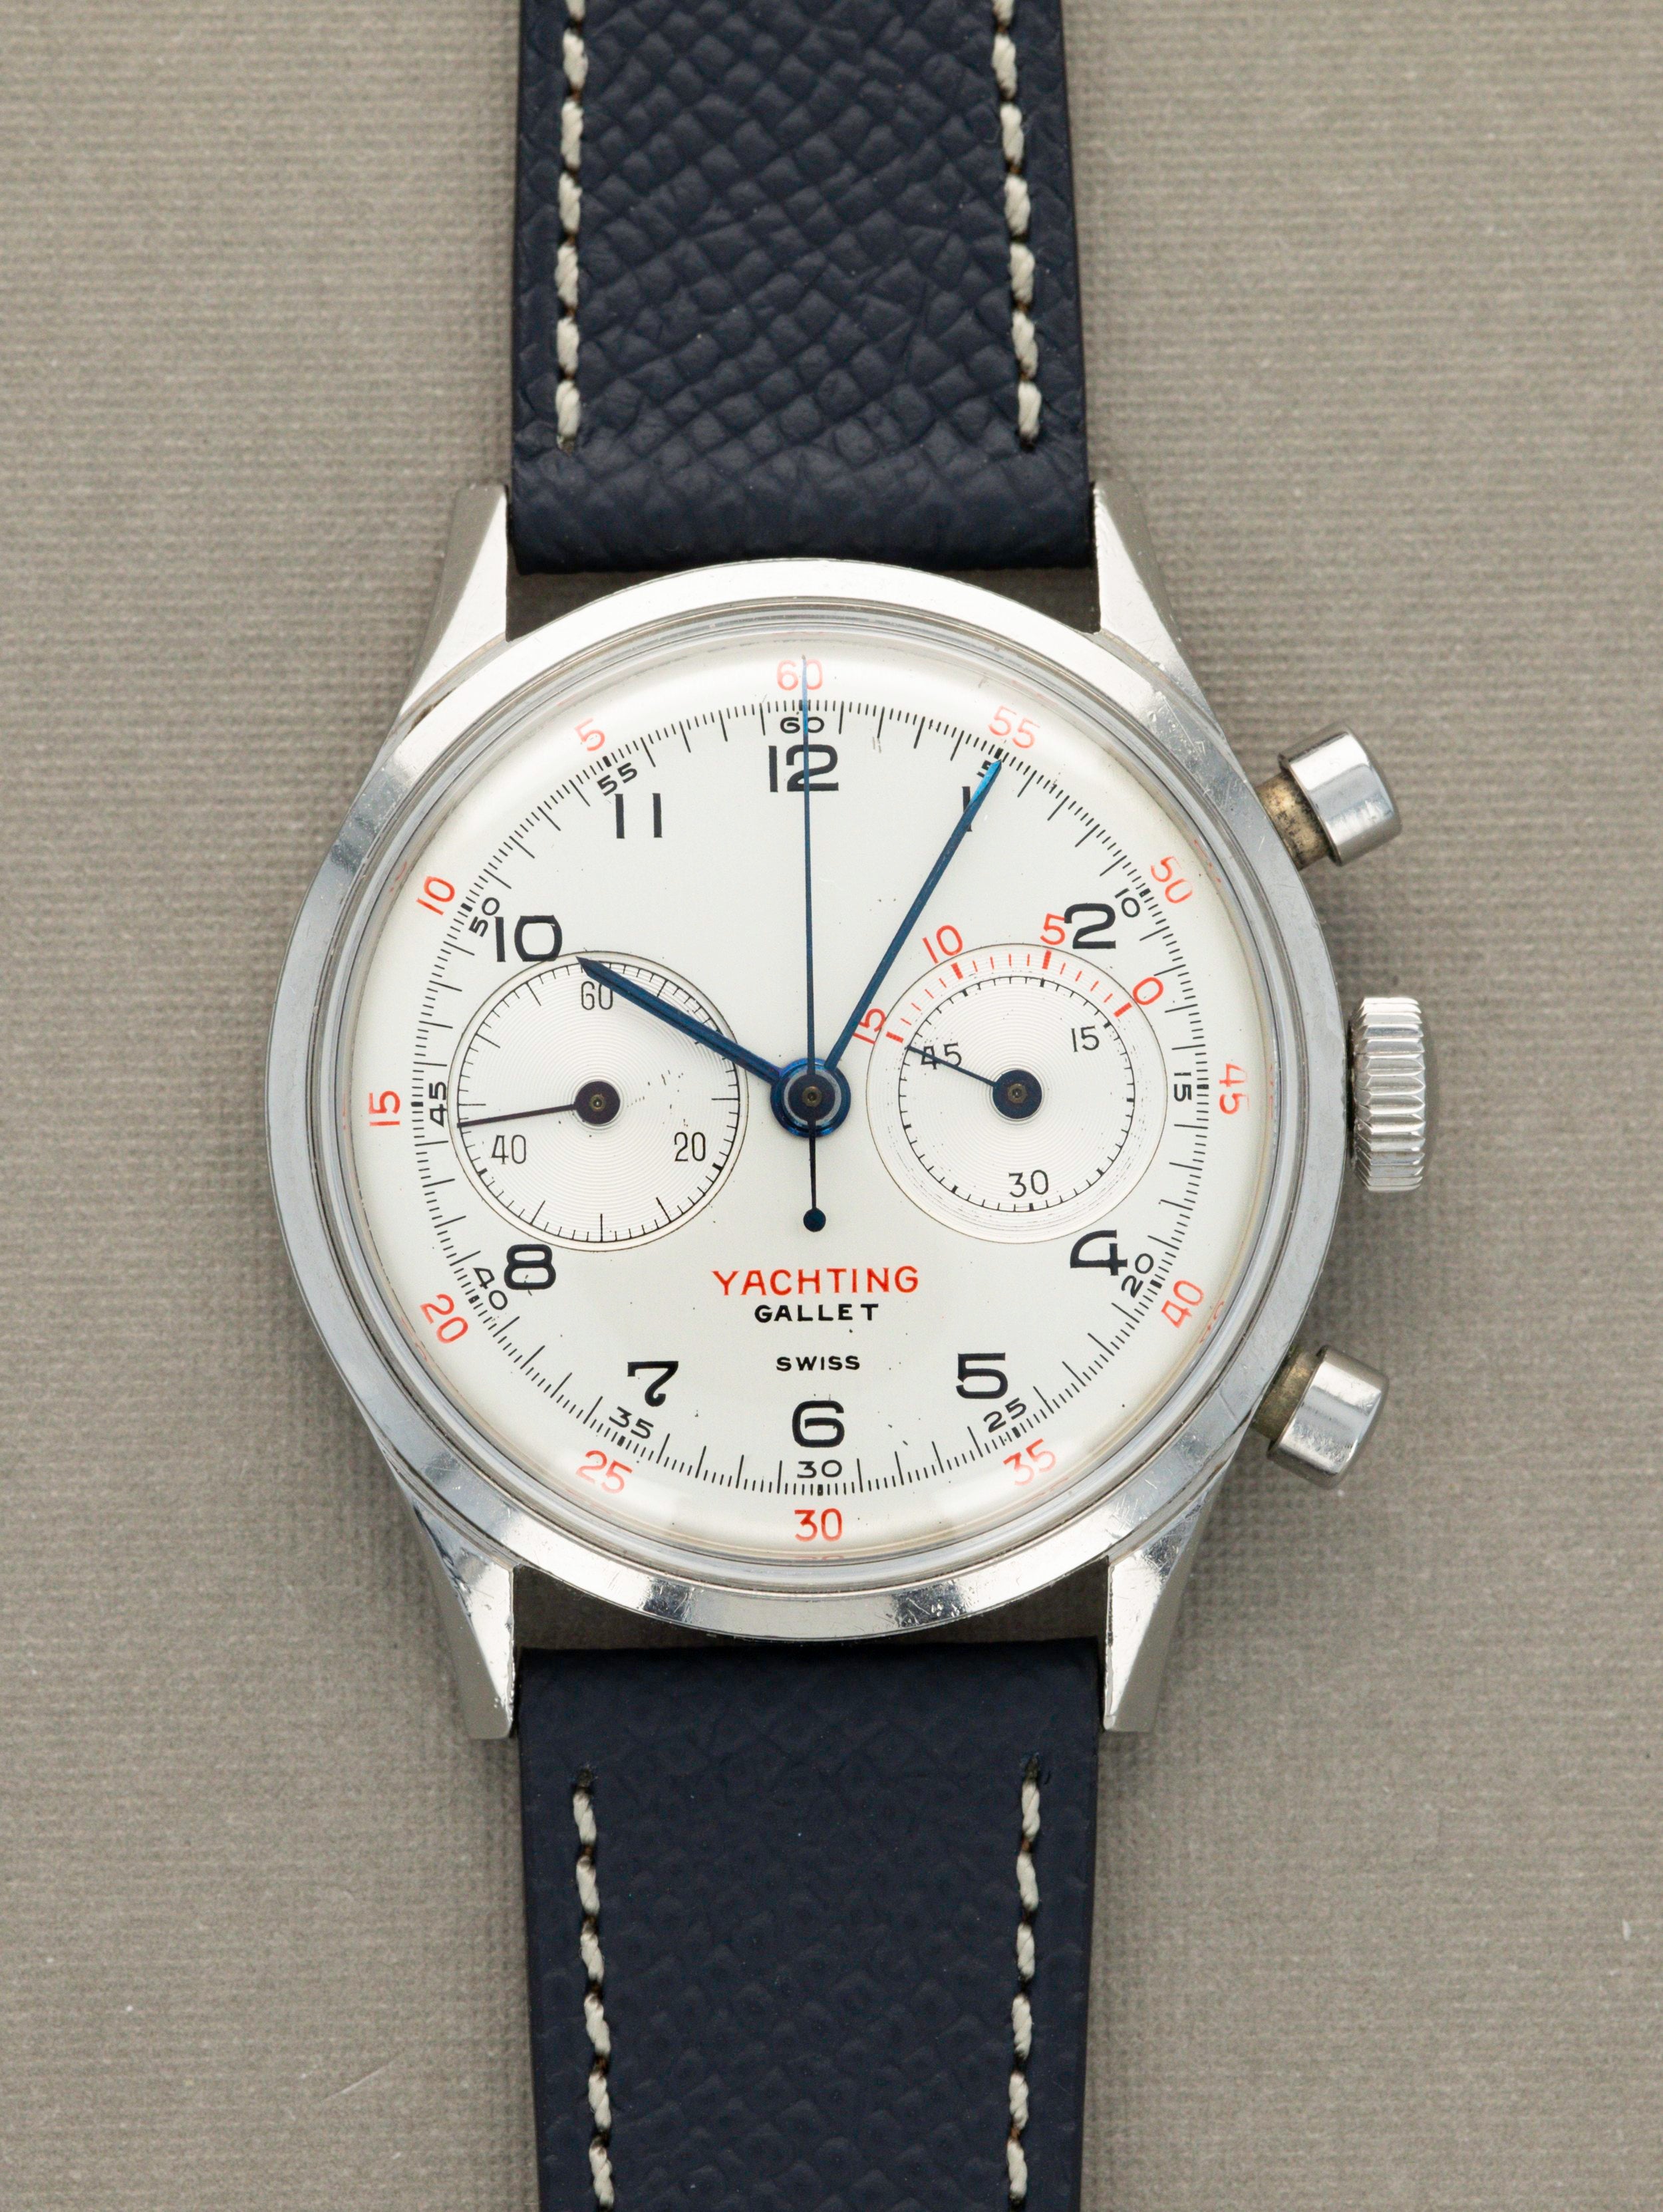 Gallet Multichron Yachting